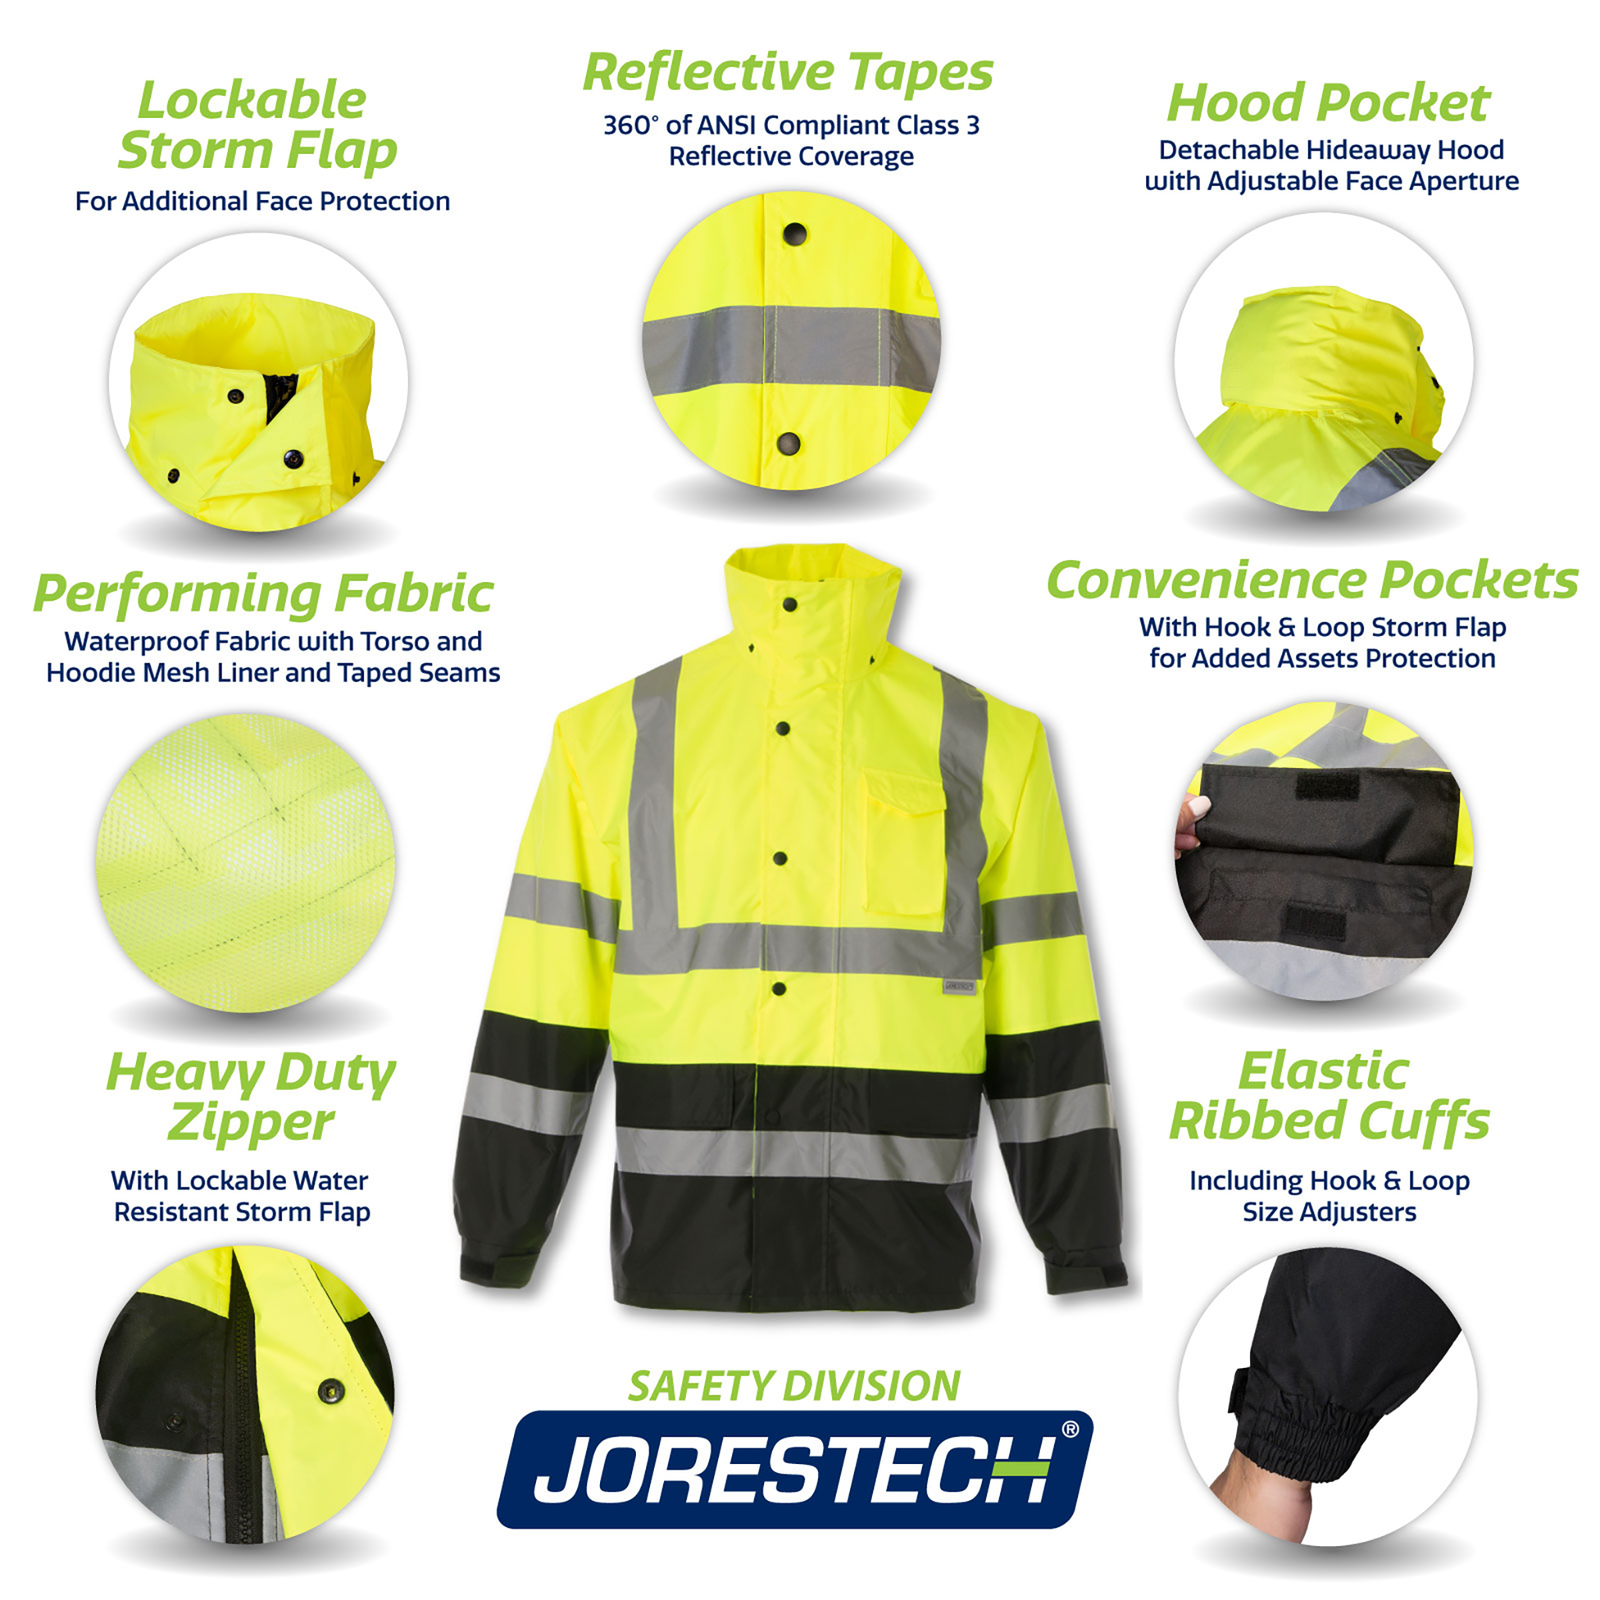 Banner describing the features of the safety rain jacket: lockable storm flap, reflective tapes, hood pocket, performing fabric, convenience pockets, heavy duty zipper, elastic ribbed cuffs